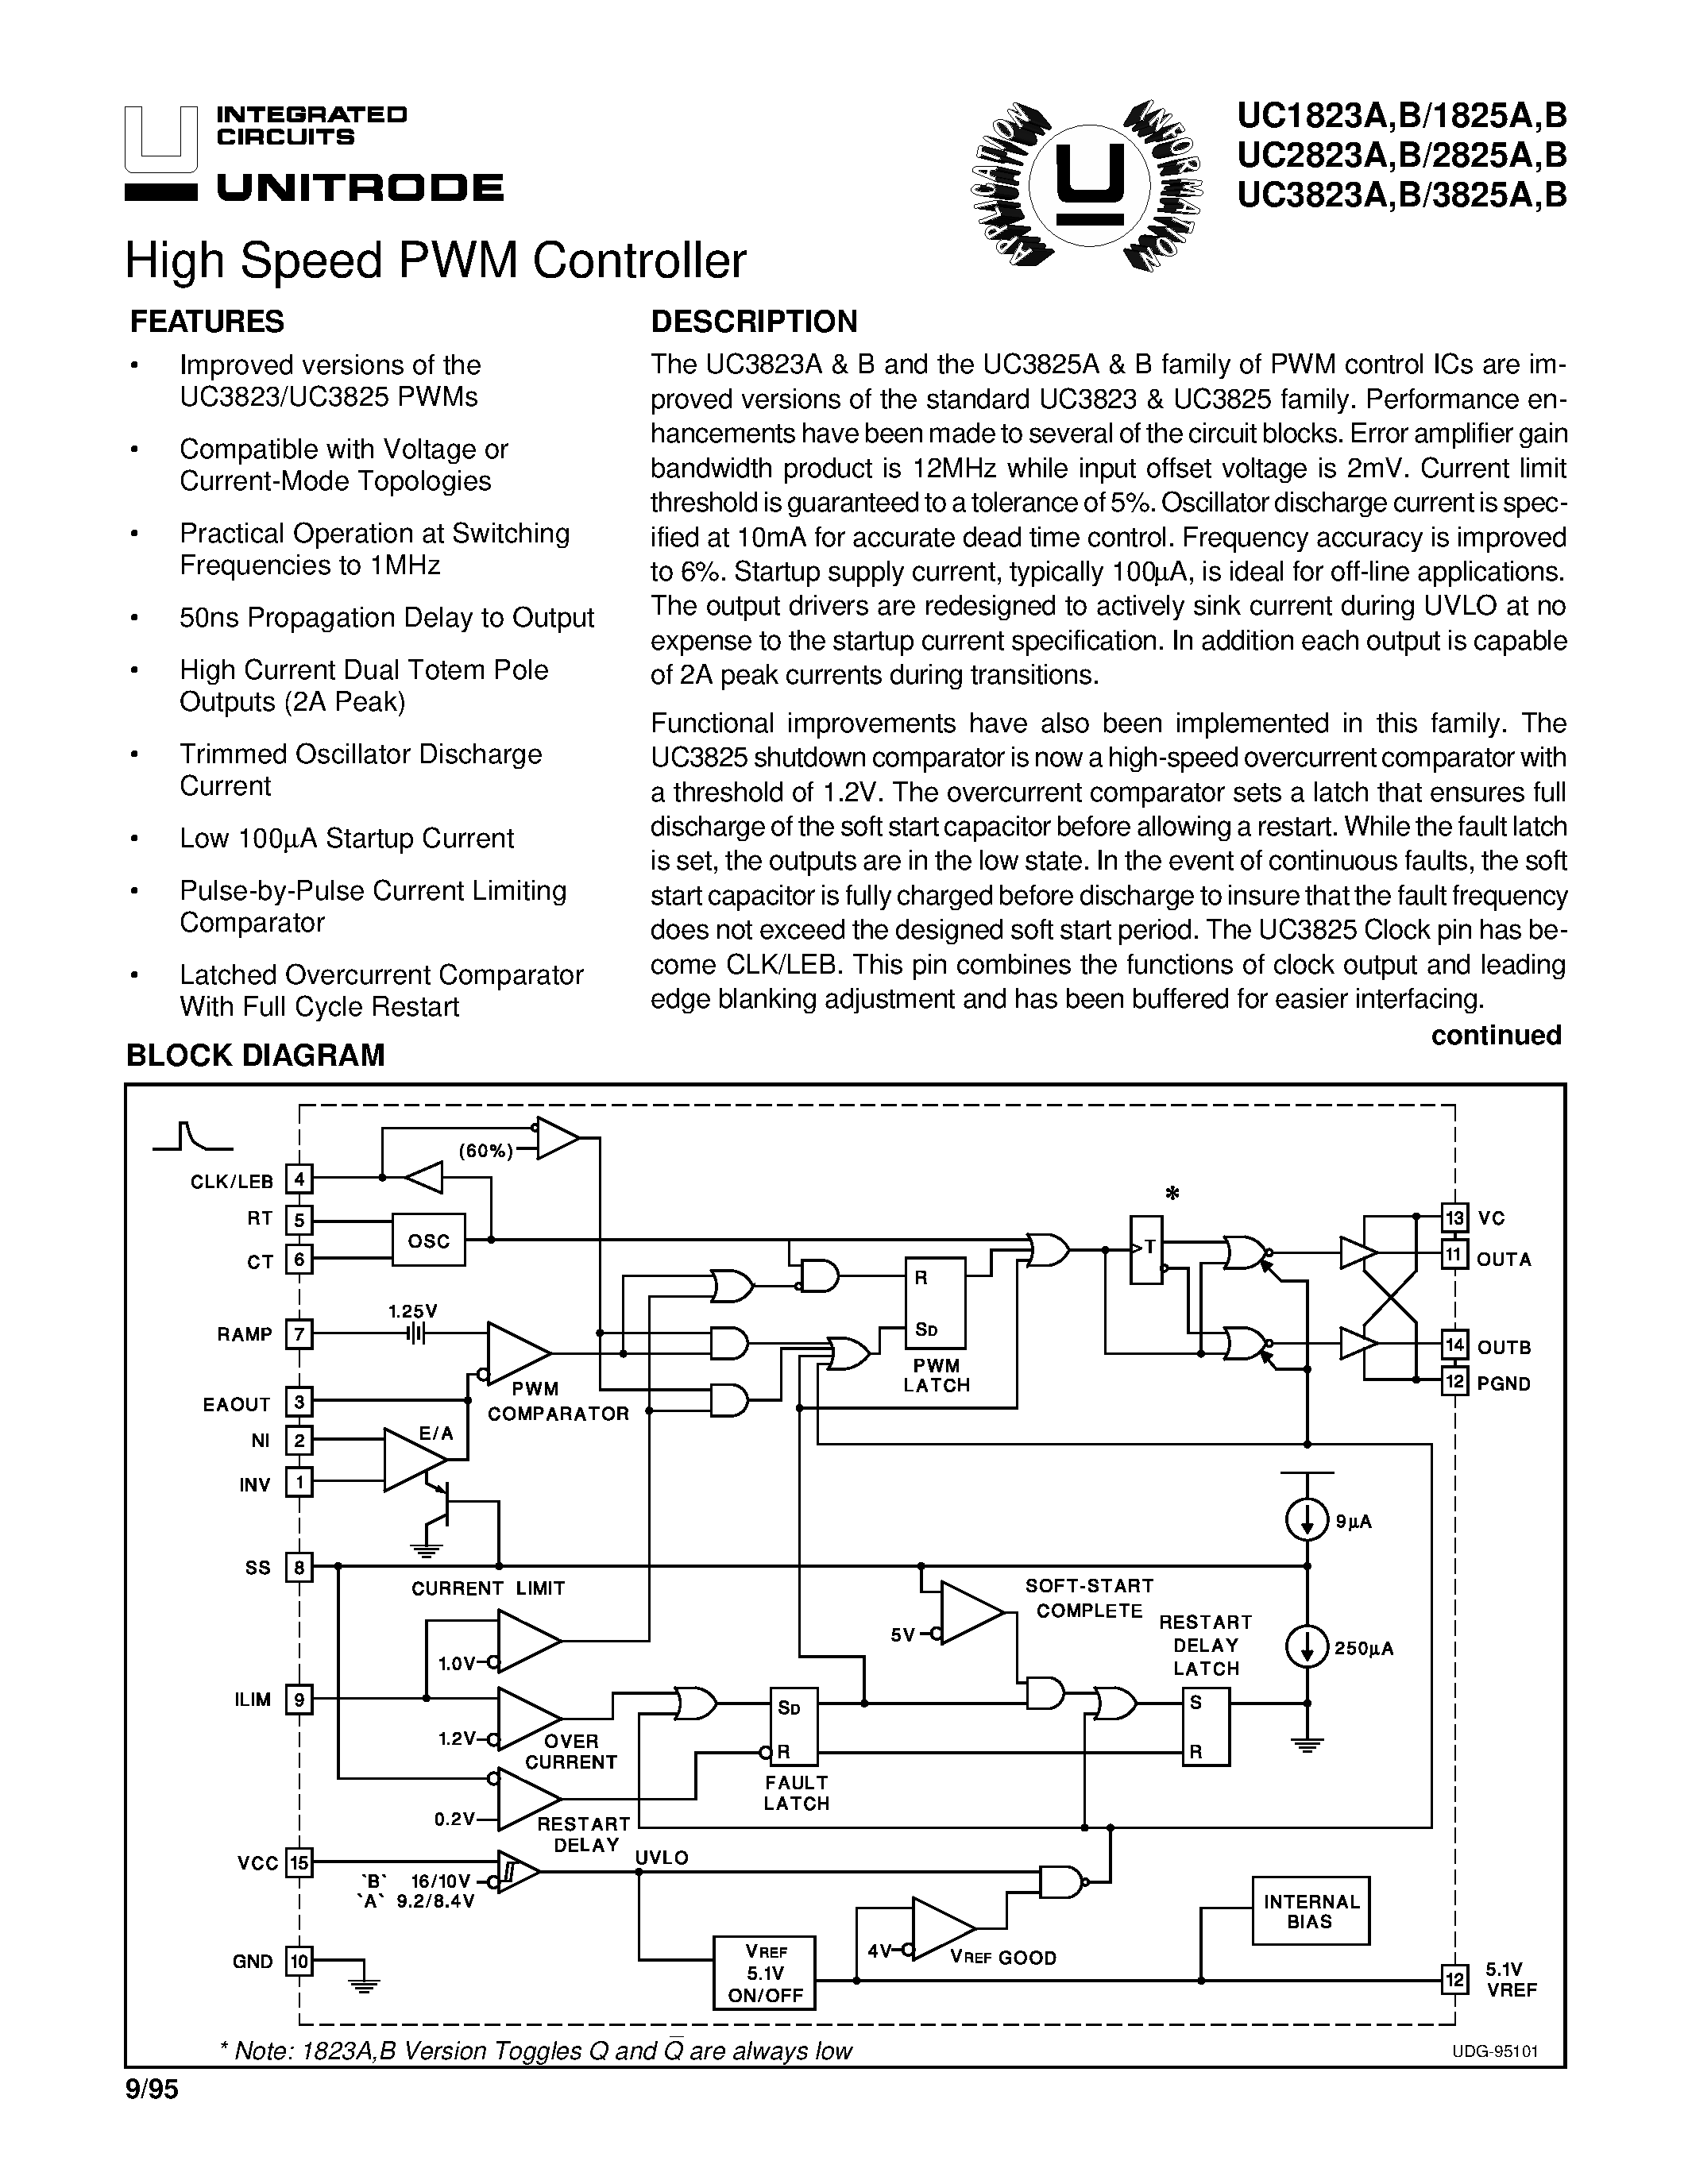 Datasheet UC2825A - High Speed PWM Controller page 1